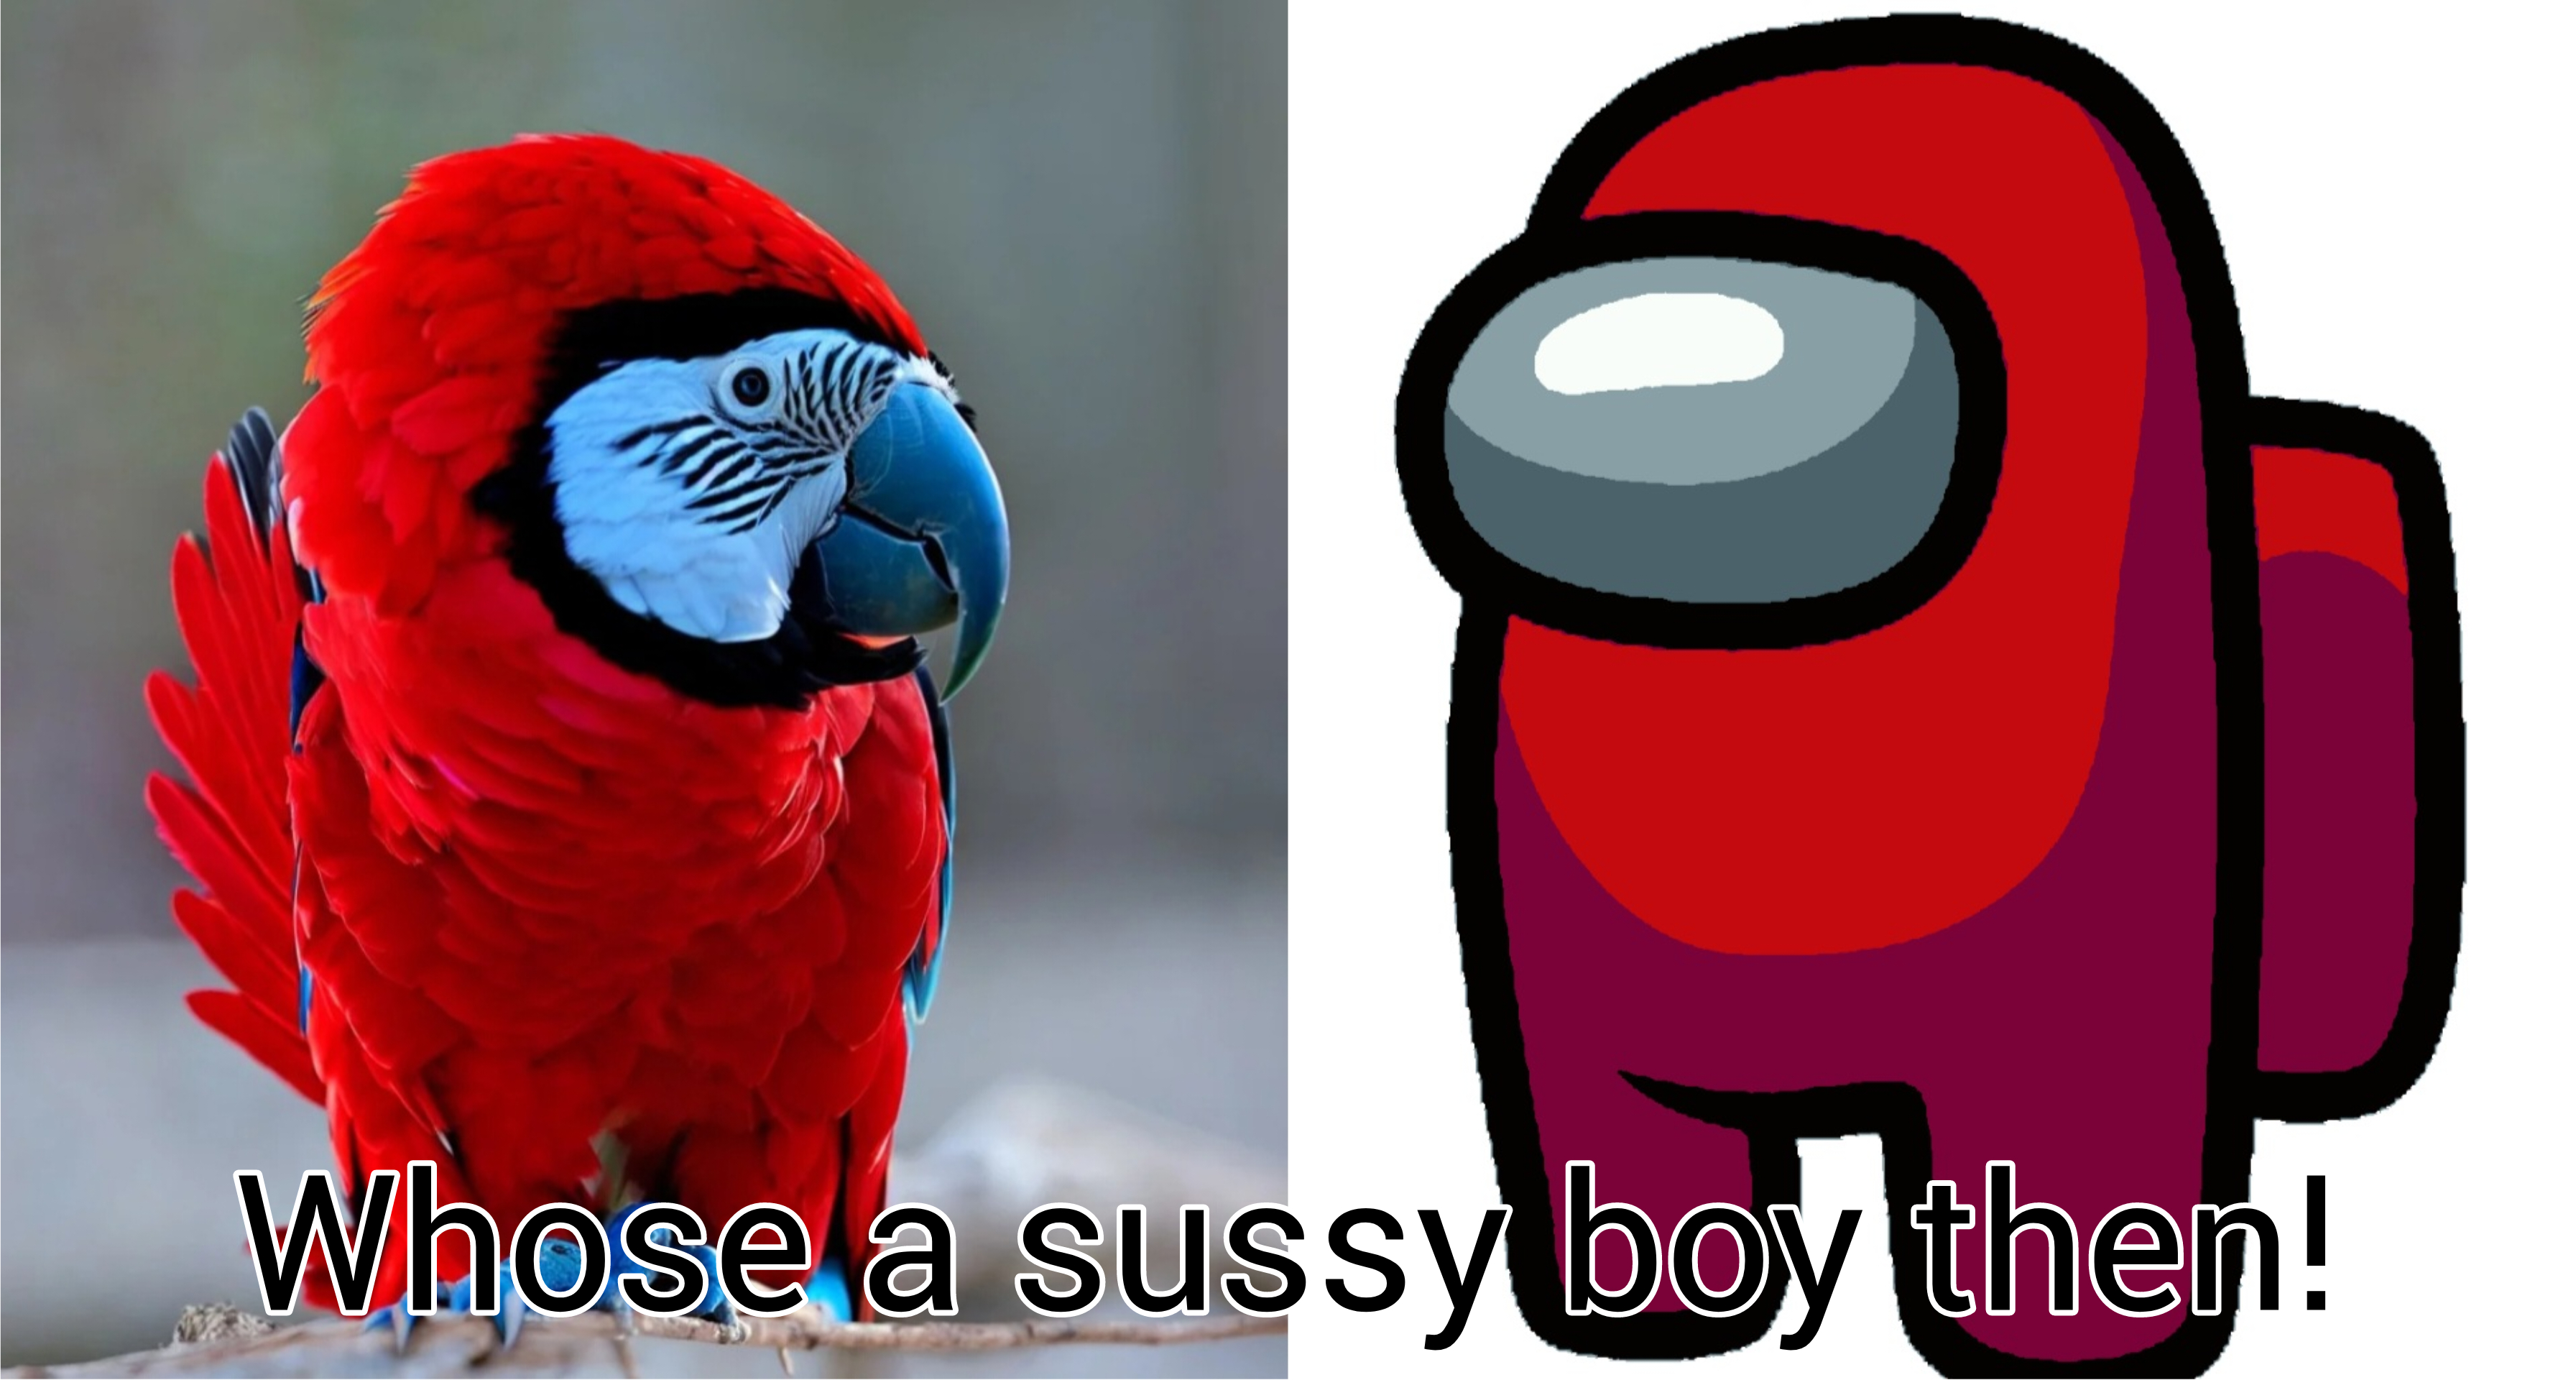 daily dose of randoms - macaw - a Whose a sussy boy then!